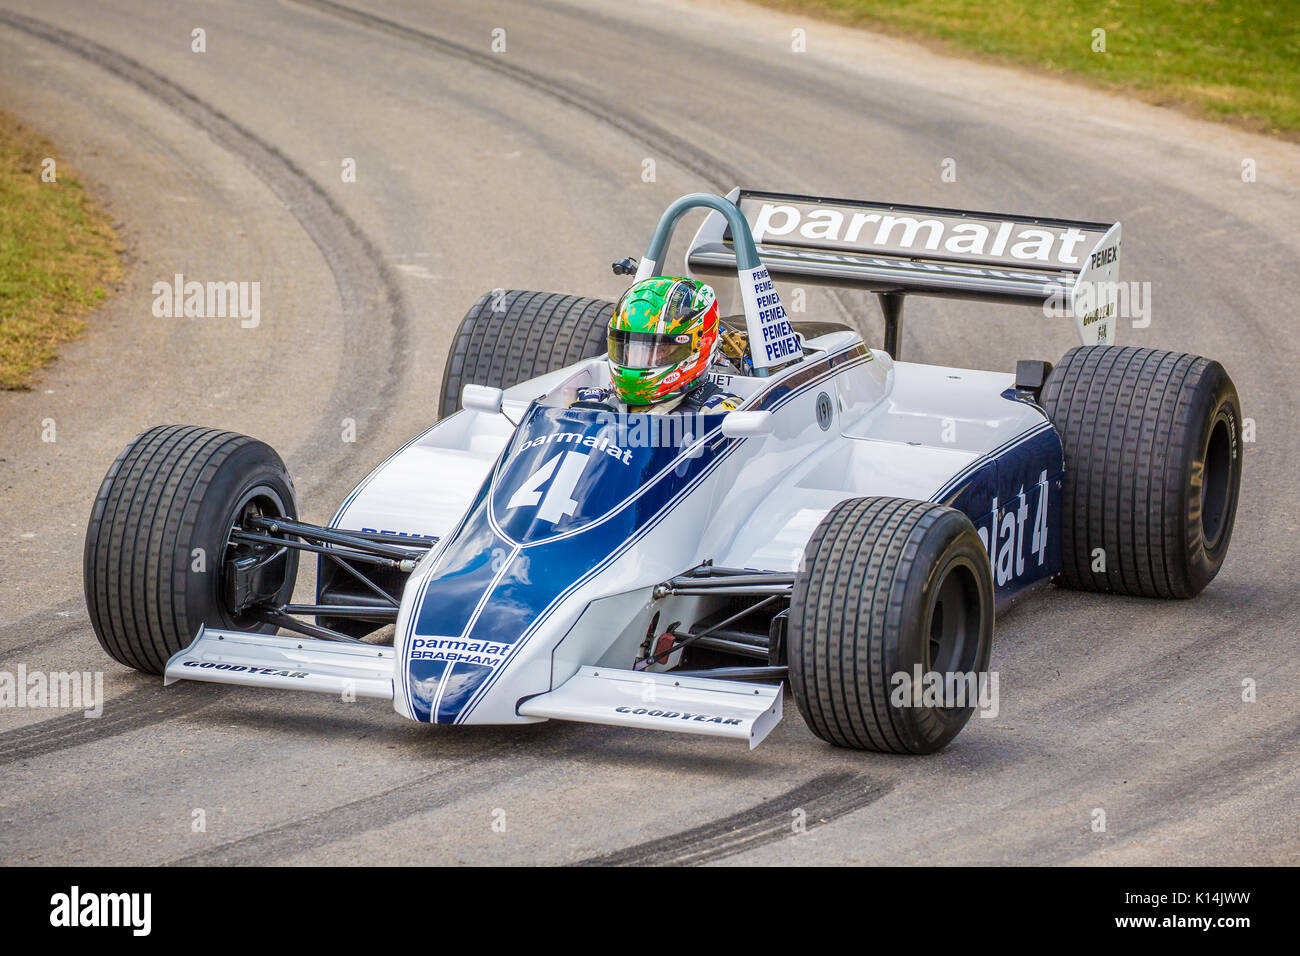 1981 Brabham-Cosworth BT49 F1 car with driver Joaquin Folch-Rusinol at the 2017 Goodwood Festival of Speed, Sussex, UK. Stock Photo